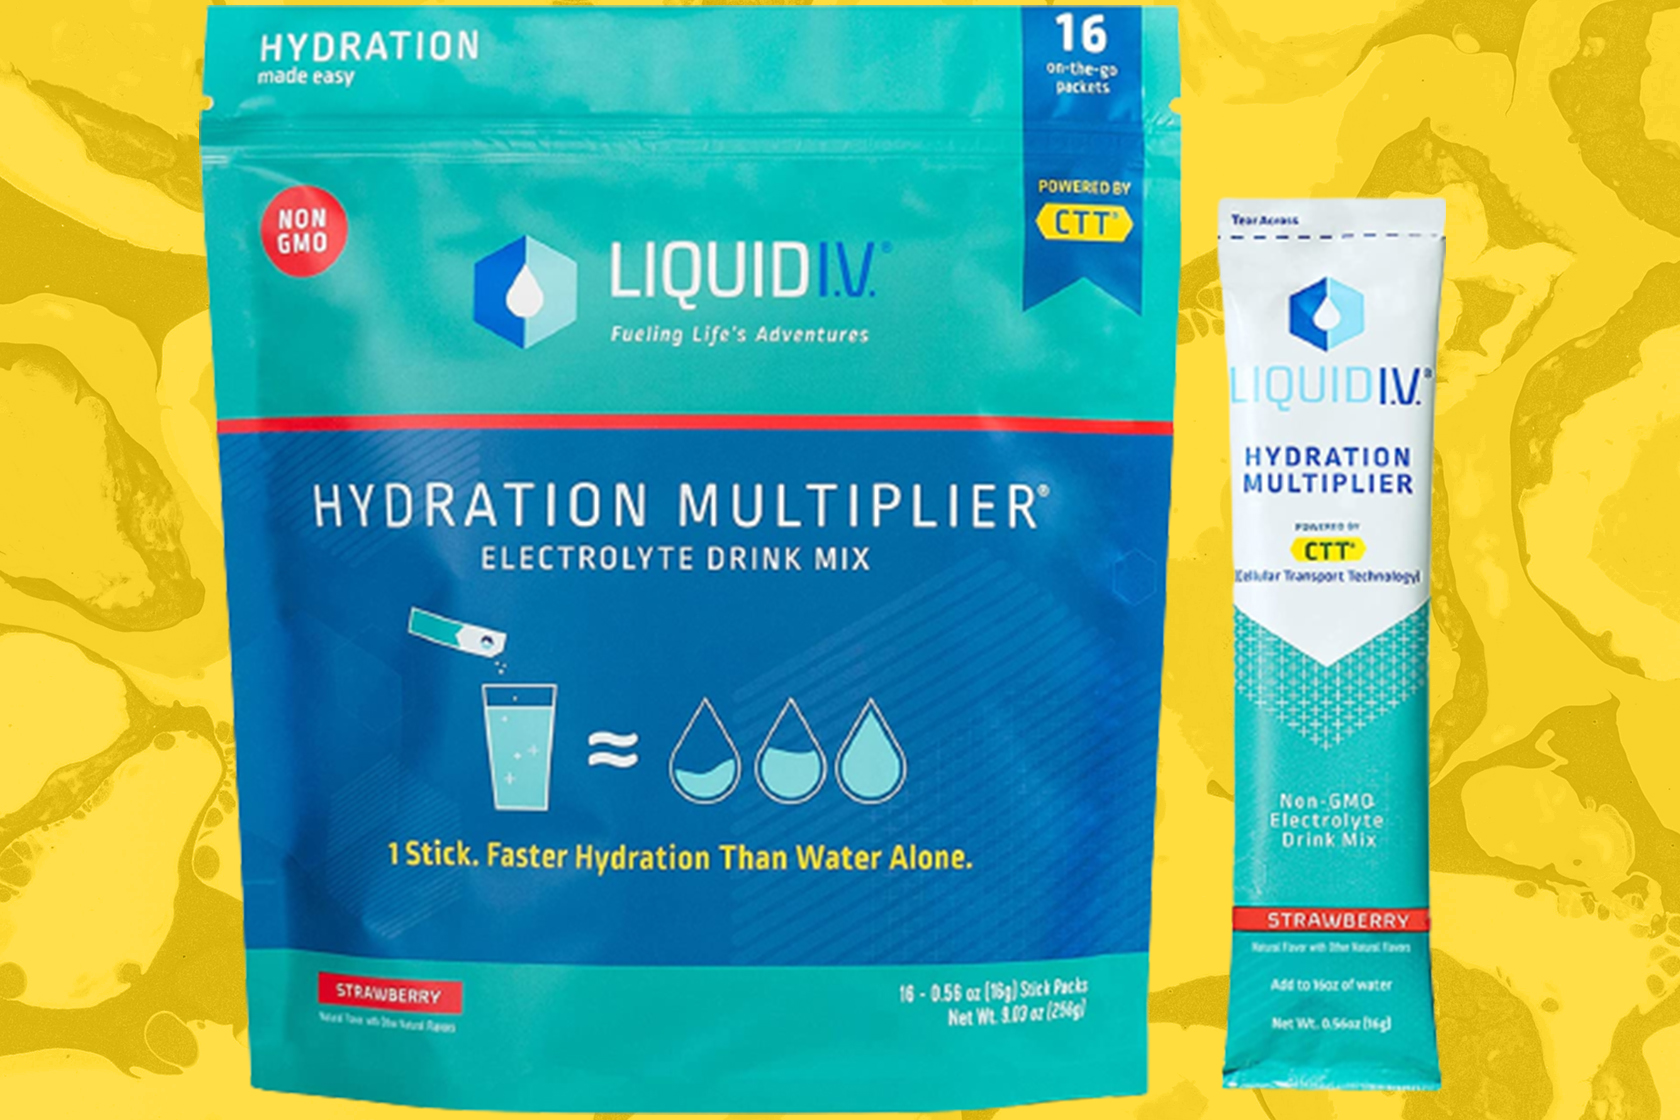 Liquid I.V. hydration workout supplement and hangover cure is on sale